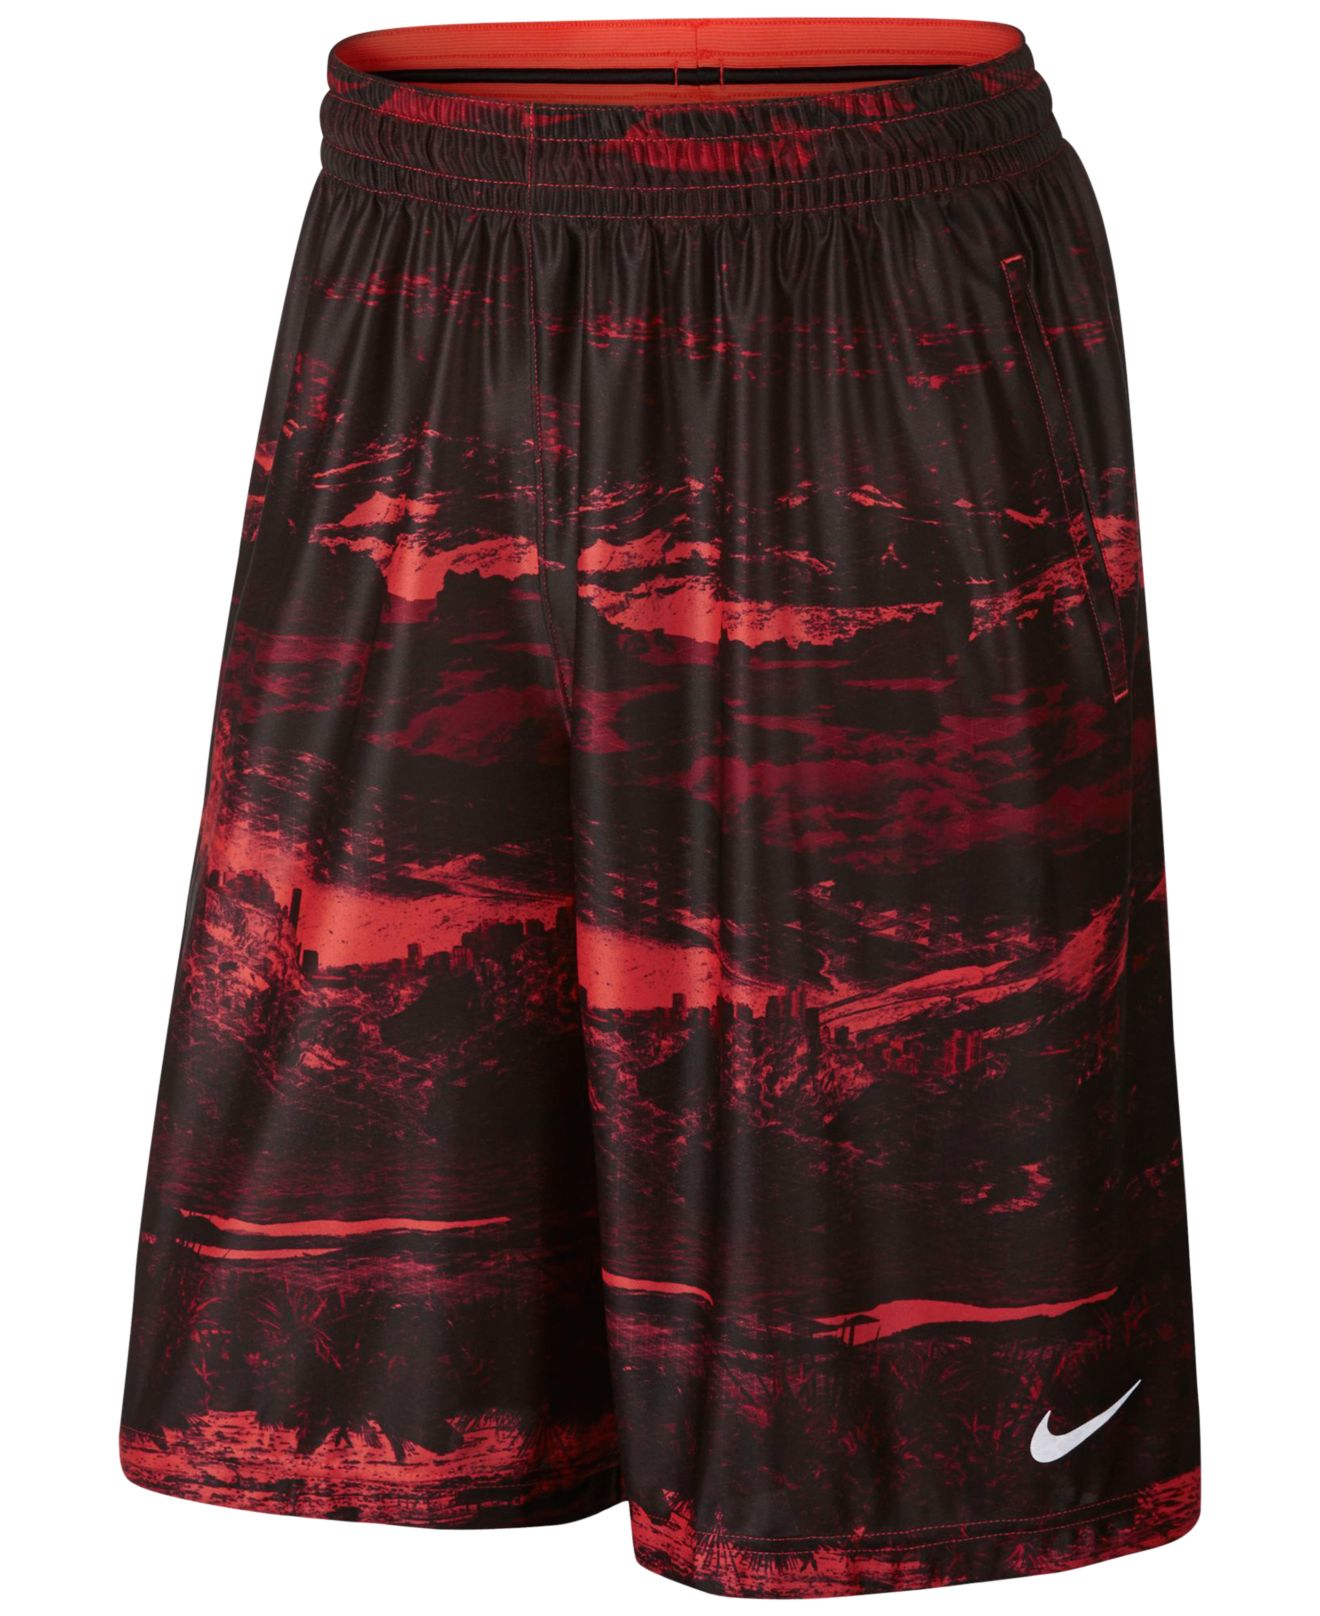 Nike Lebron Ultimate Elite Dri-fit Print Basketball Shorts in Red | Lyst